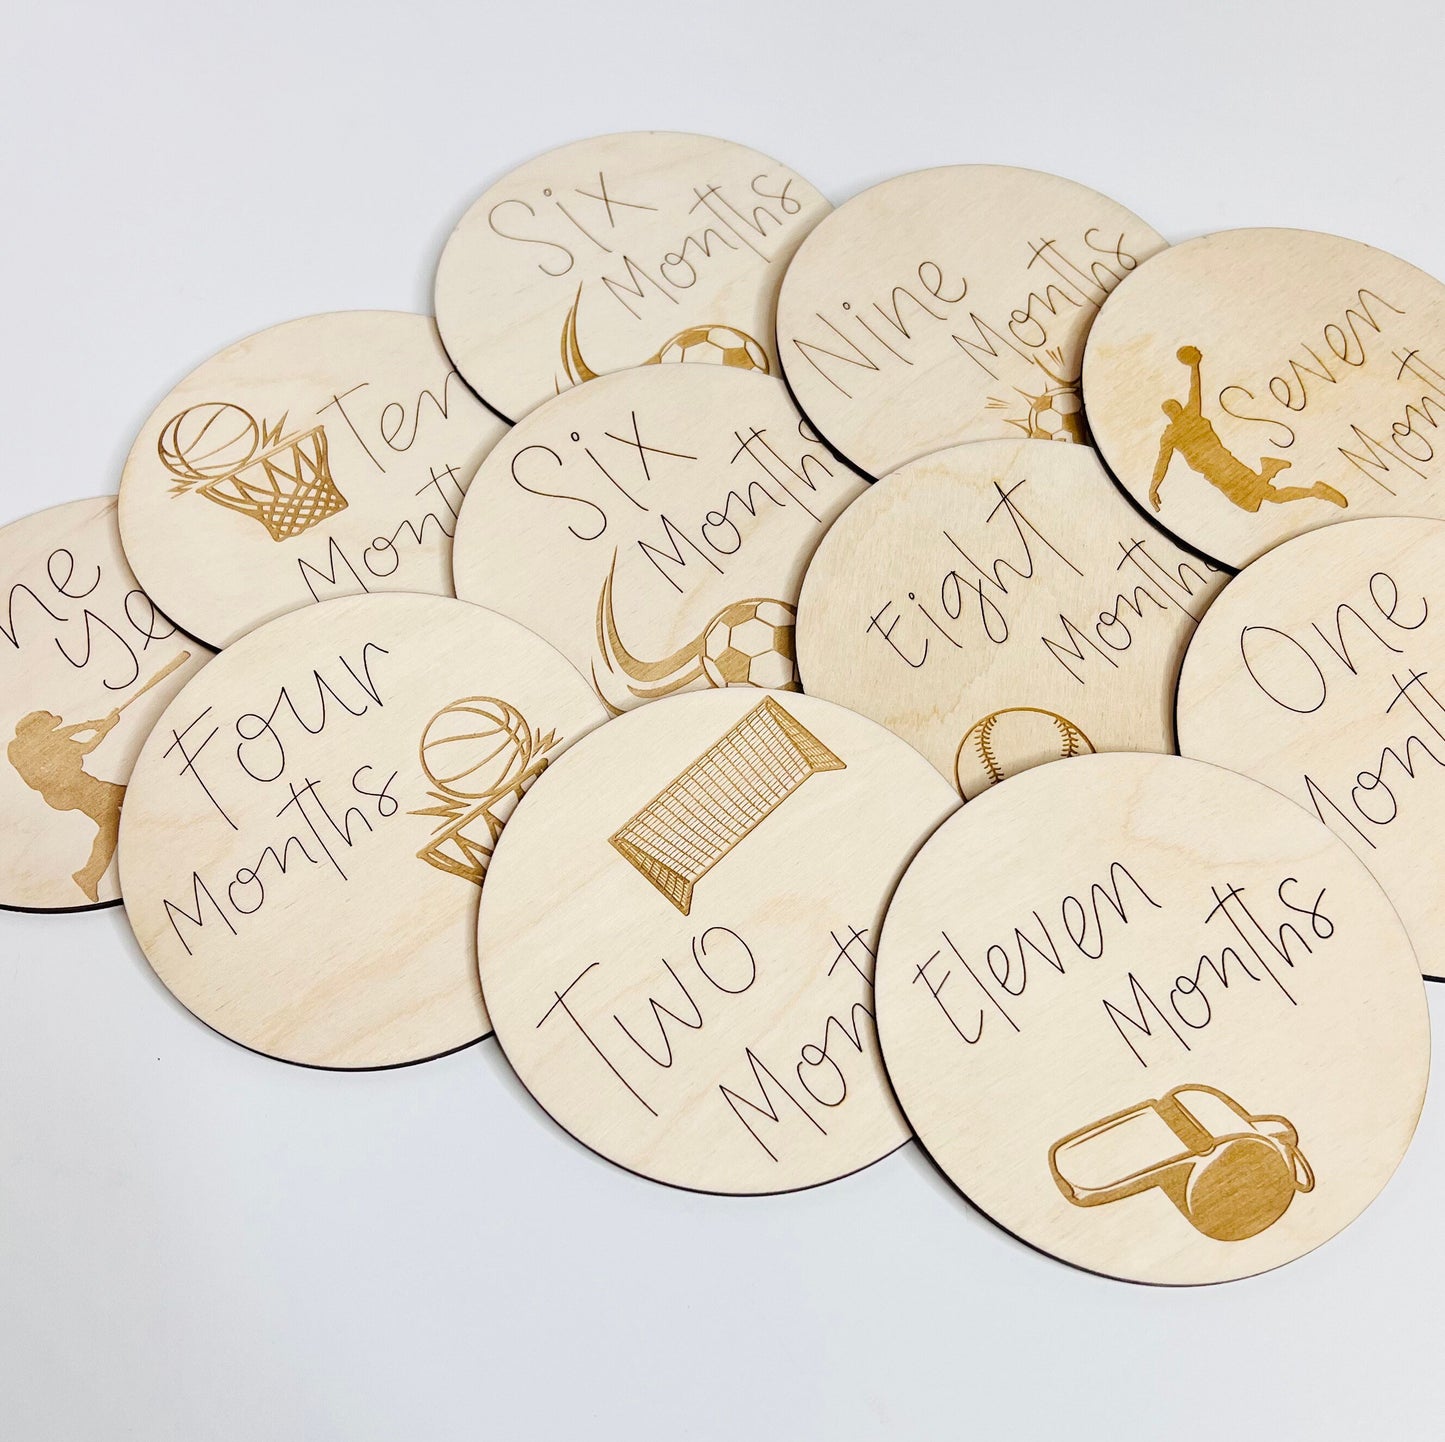 Wooden Monthly Milestone Markers for Baby Photos, Sports Themed Milestone Disc, Baby Gift